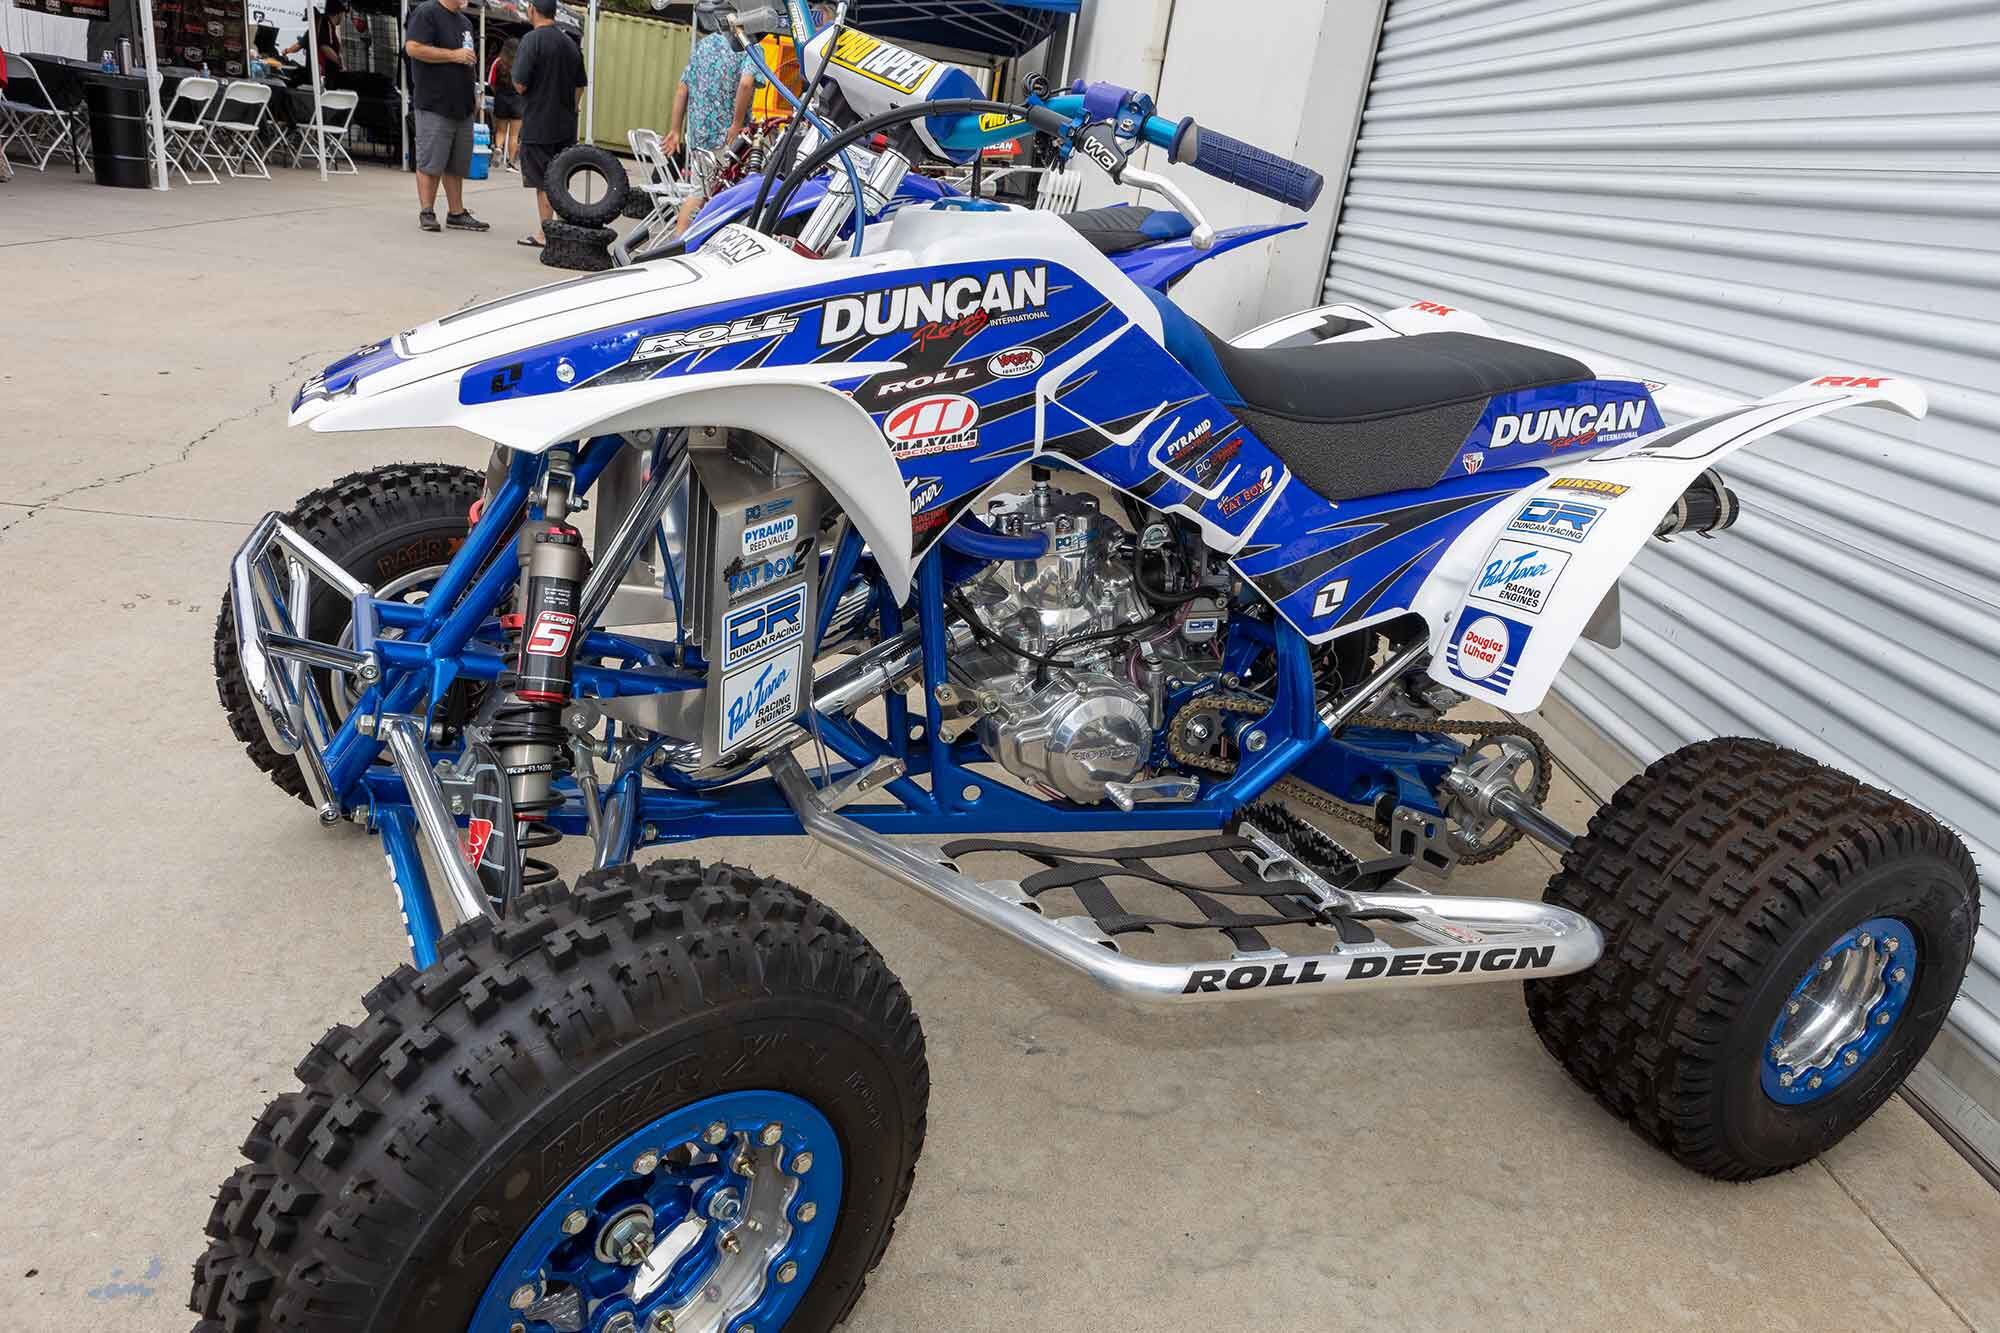 This is what a $35,000 Lobo 250R looks like, and it’s already sold.